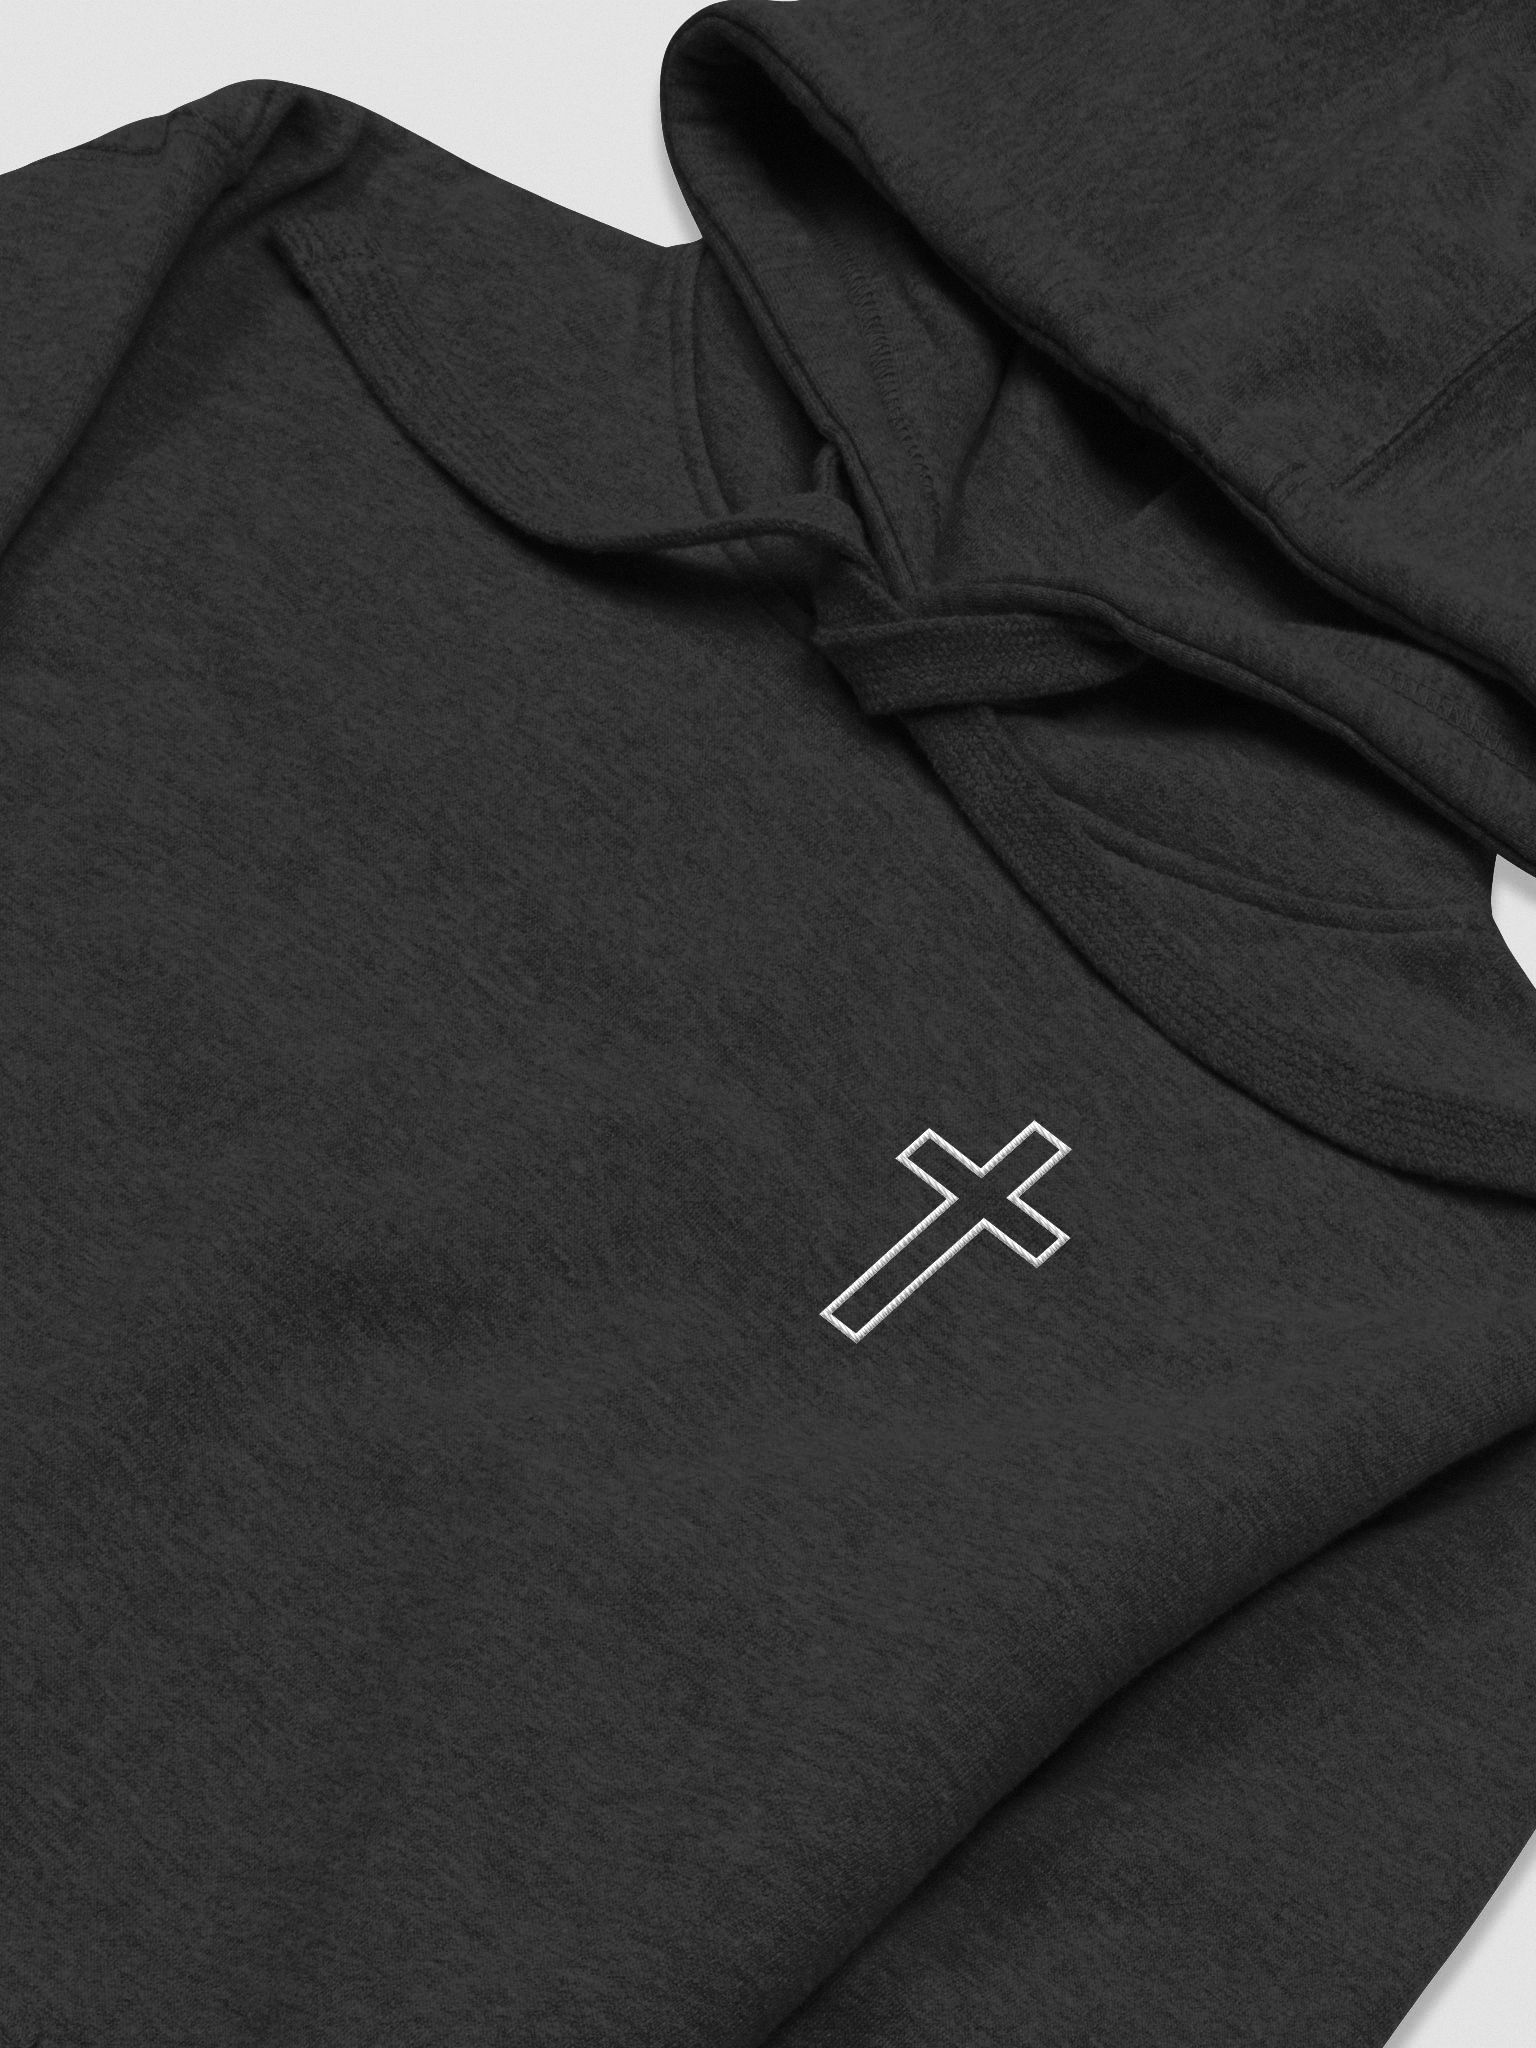 Simple Cross Embroidered Black Hoodie | HVN Threads